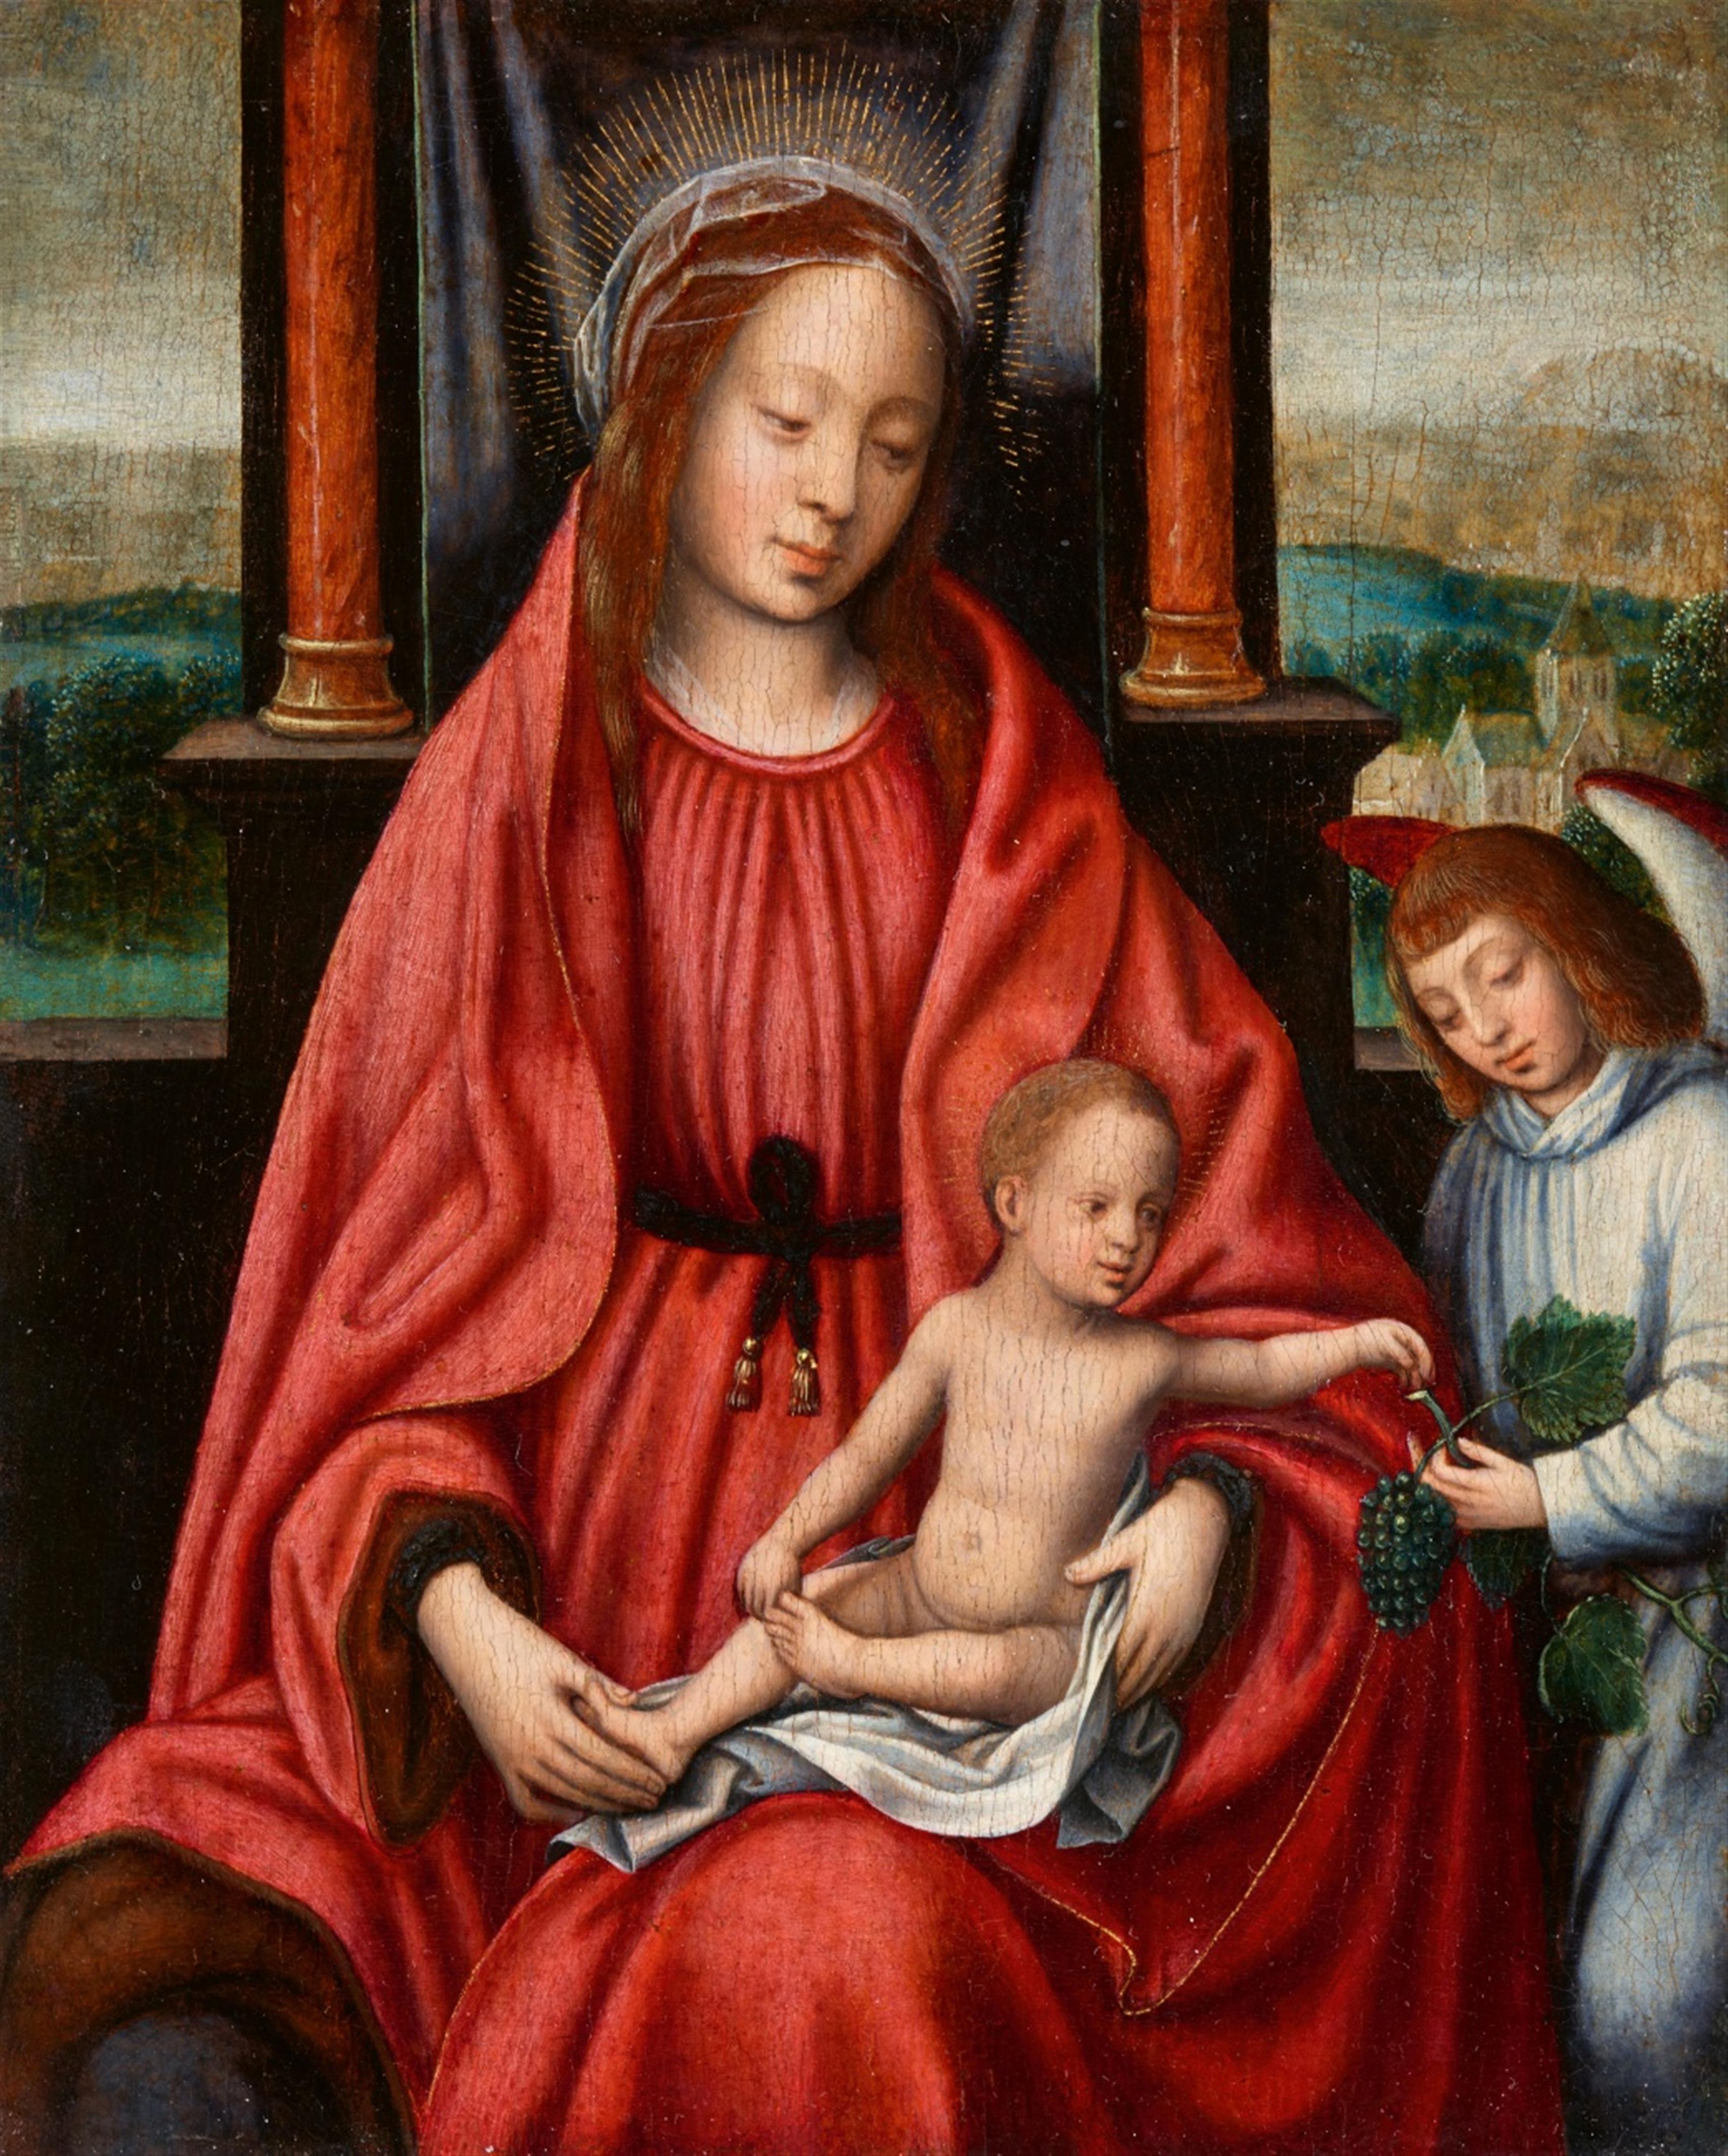 Netherlandish School 16th century - The Virgin and Child with an Angel - image-1